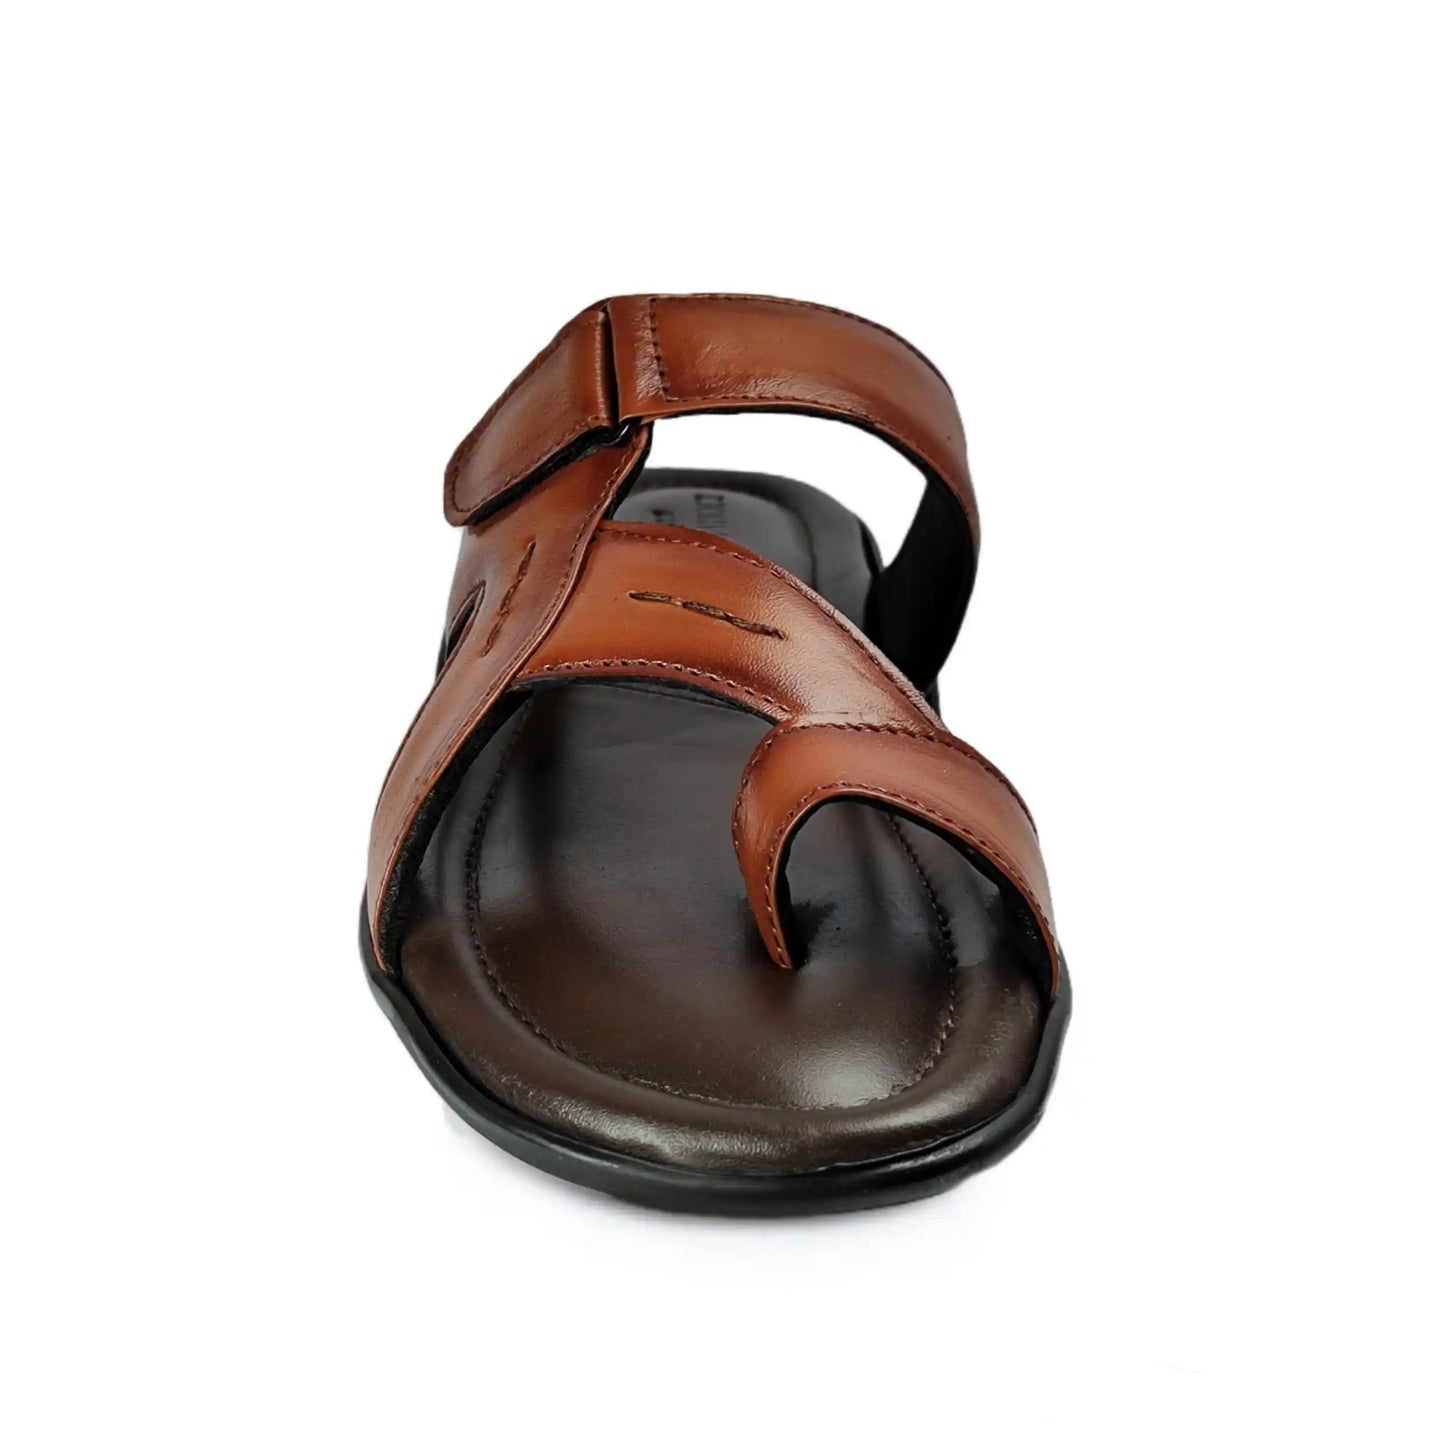 Sandals for Men Pure Leather Slippers